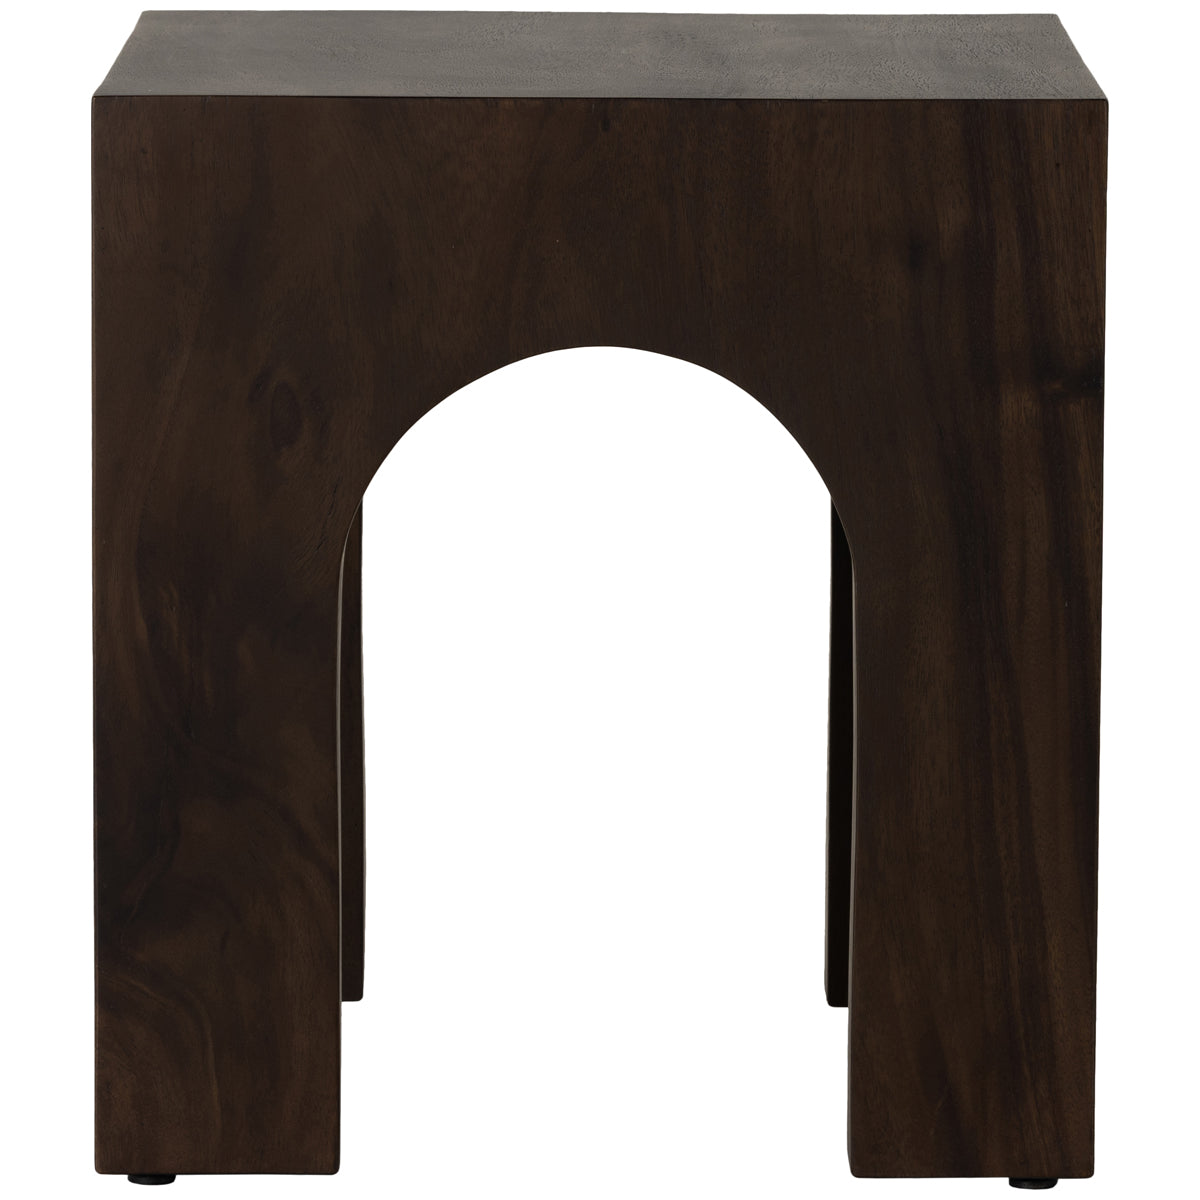 Four Hands Wesson Fausto End Table - Smoked Guanacaste